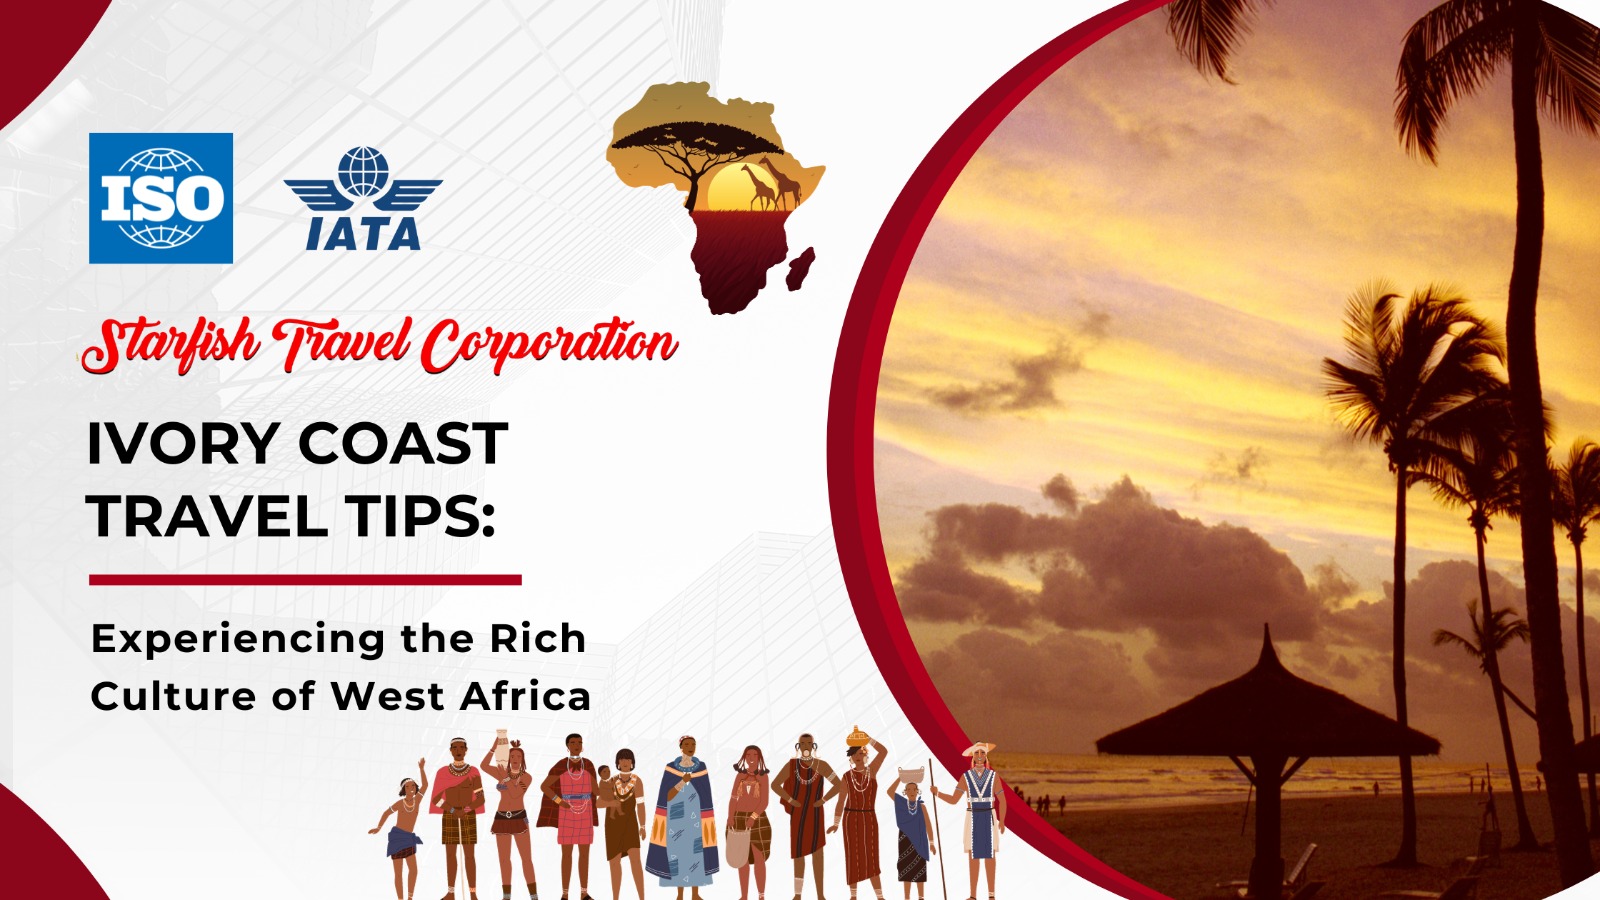 Ivory Coast Travel Tips: Experiencing the Rich Culture of West Africa